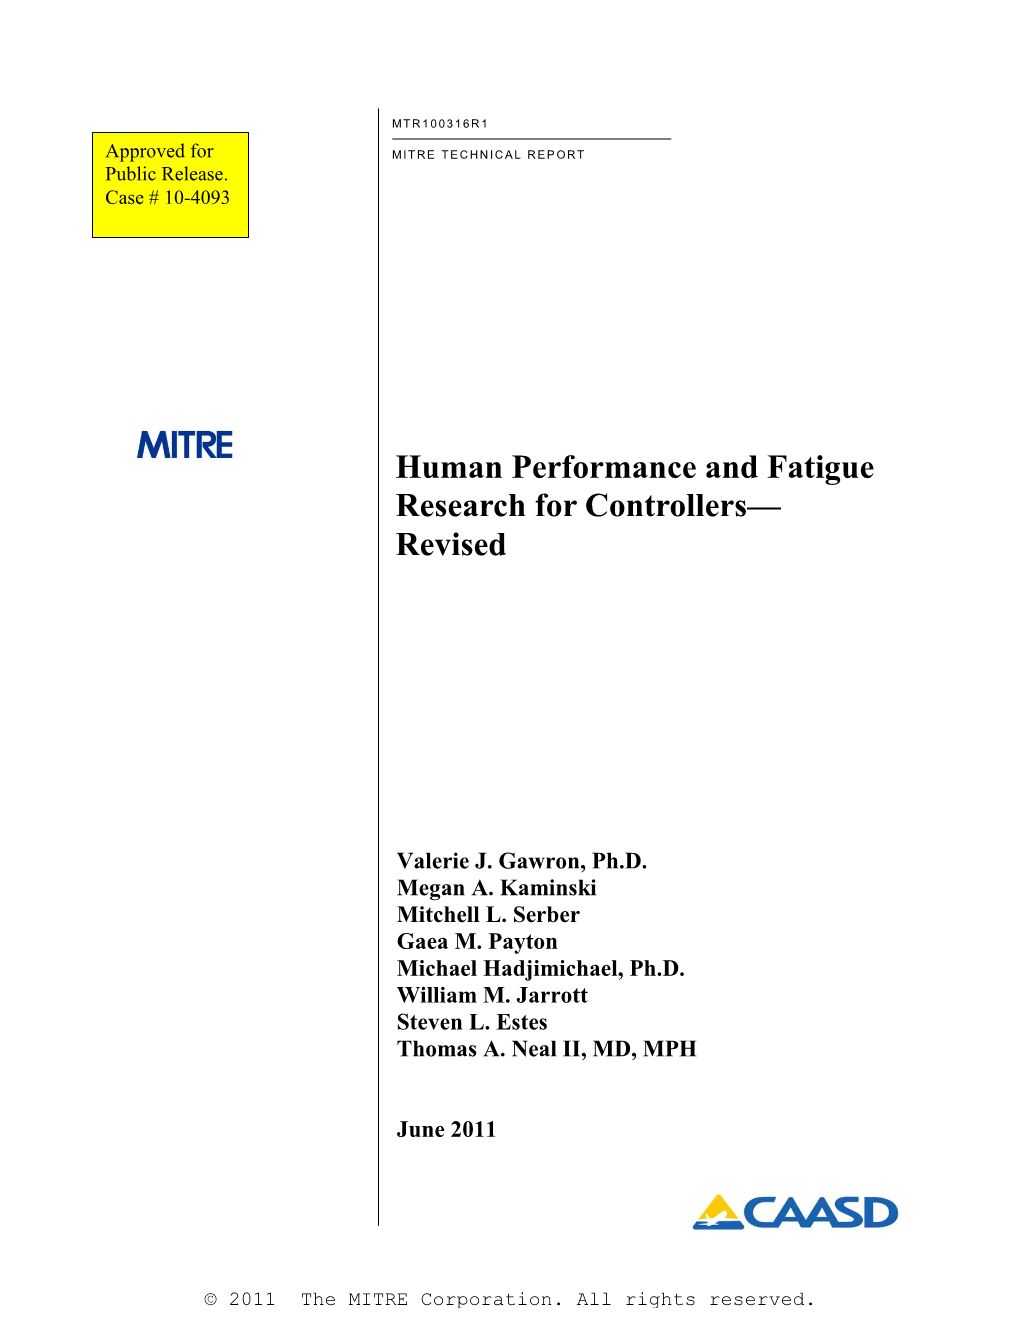 Human Performance and Fatigue Research for Controllers— Revised